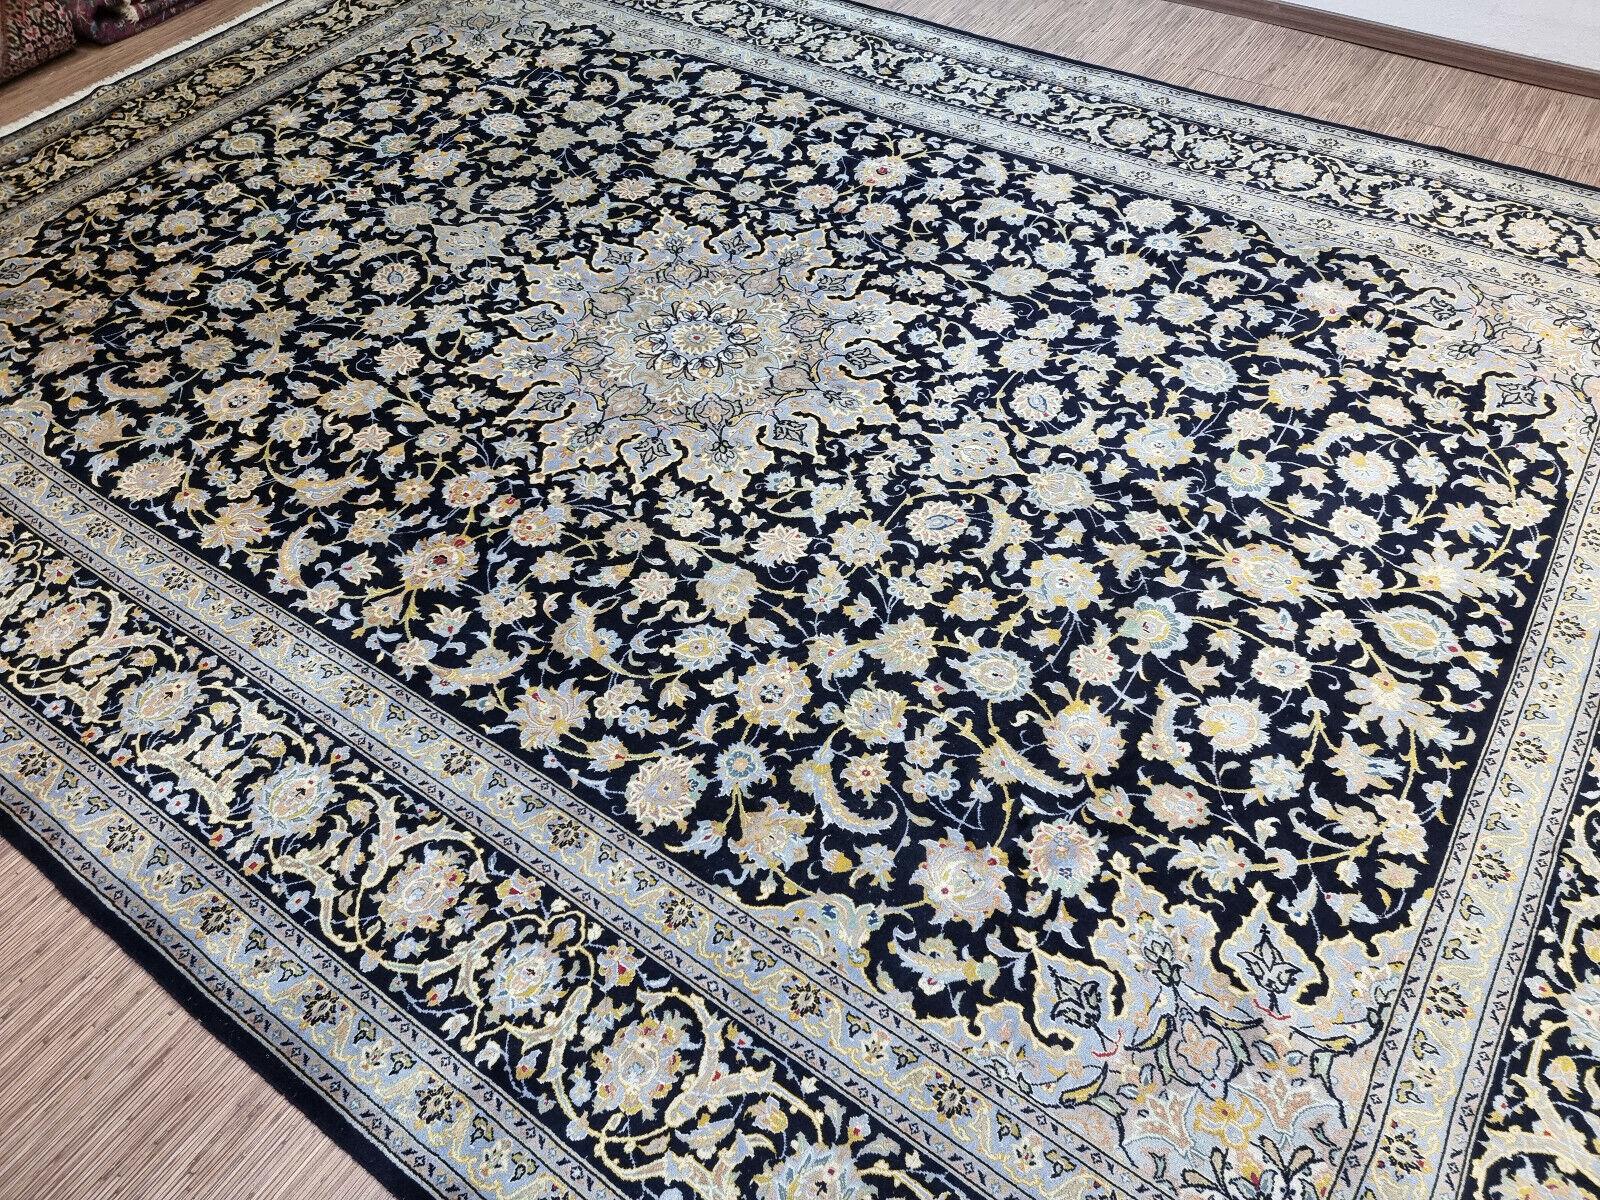 Transform your space with this Handmade Vintage Persian Style Kashan Oversize Rug. This magnificent rug measures at a spacious 10.1’ x 14.4’ (310cm x 440cm), making it ideal for large rooms and areas.

Color Palette: The rug features a dark base